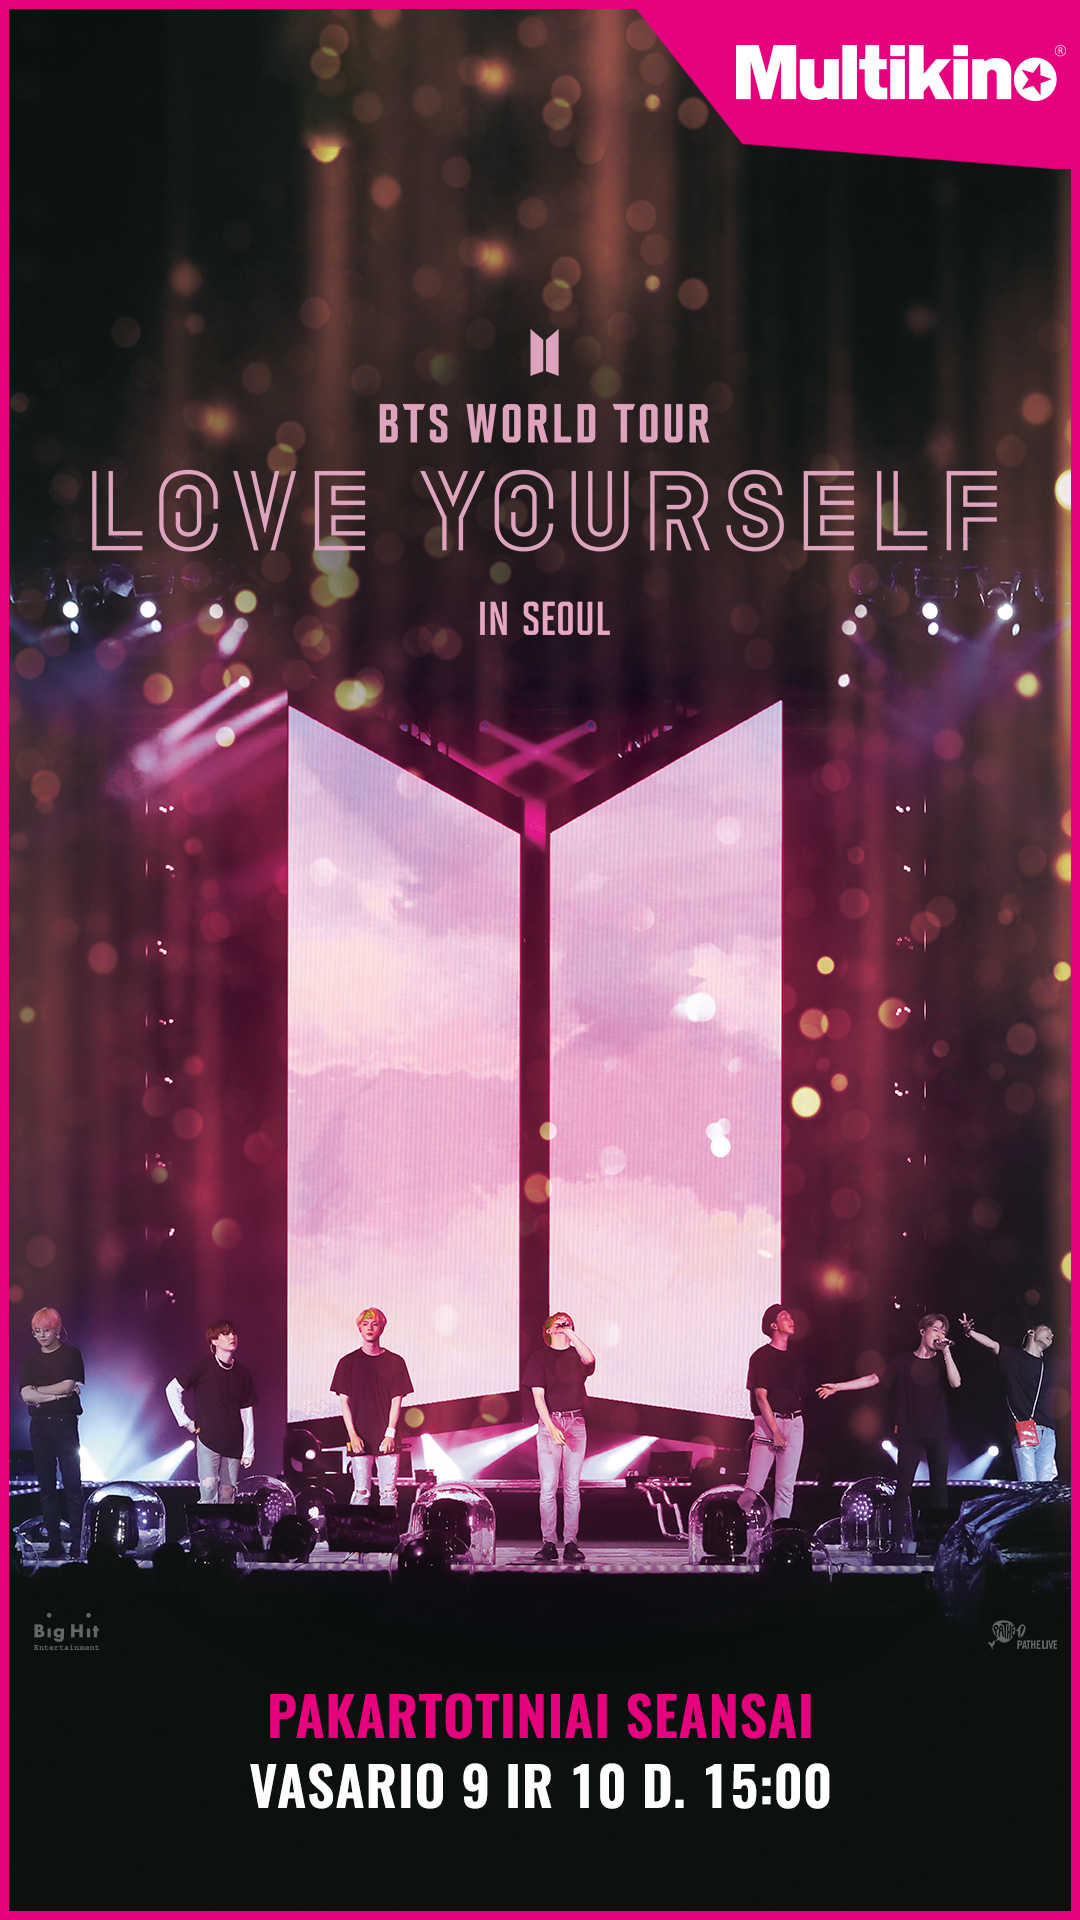 BTS WORLD TOUR: LOVE YOURSELF IN SEOUL